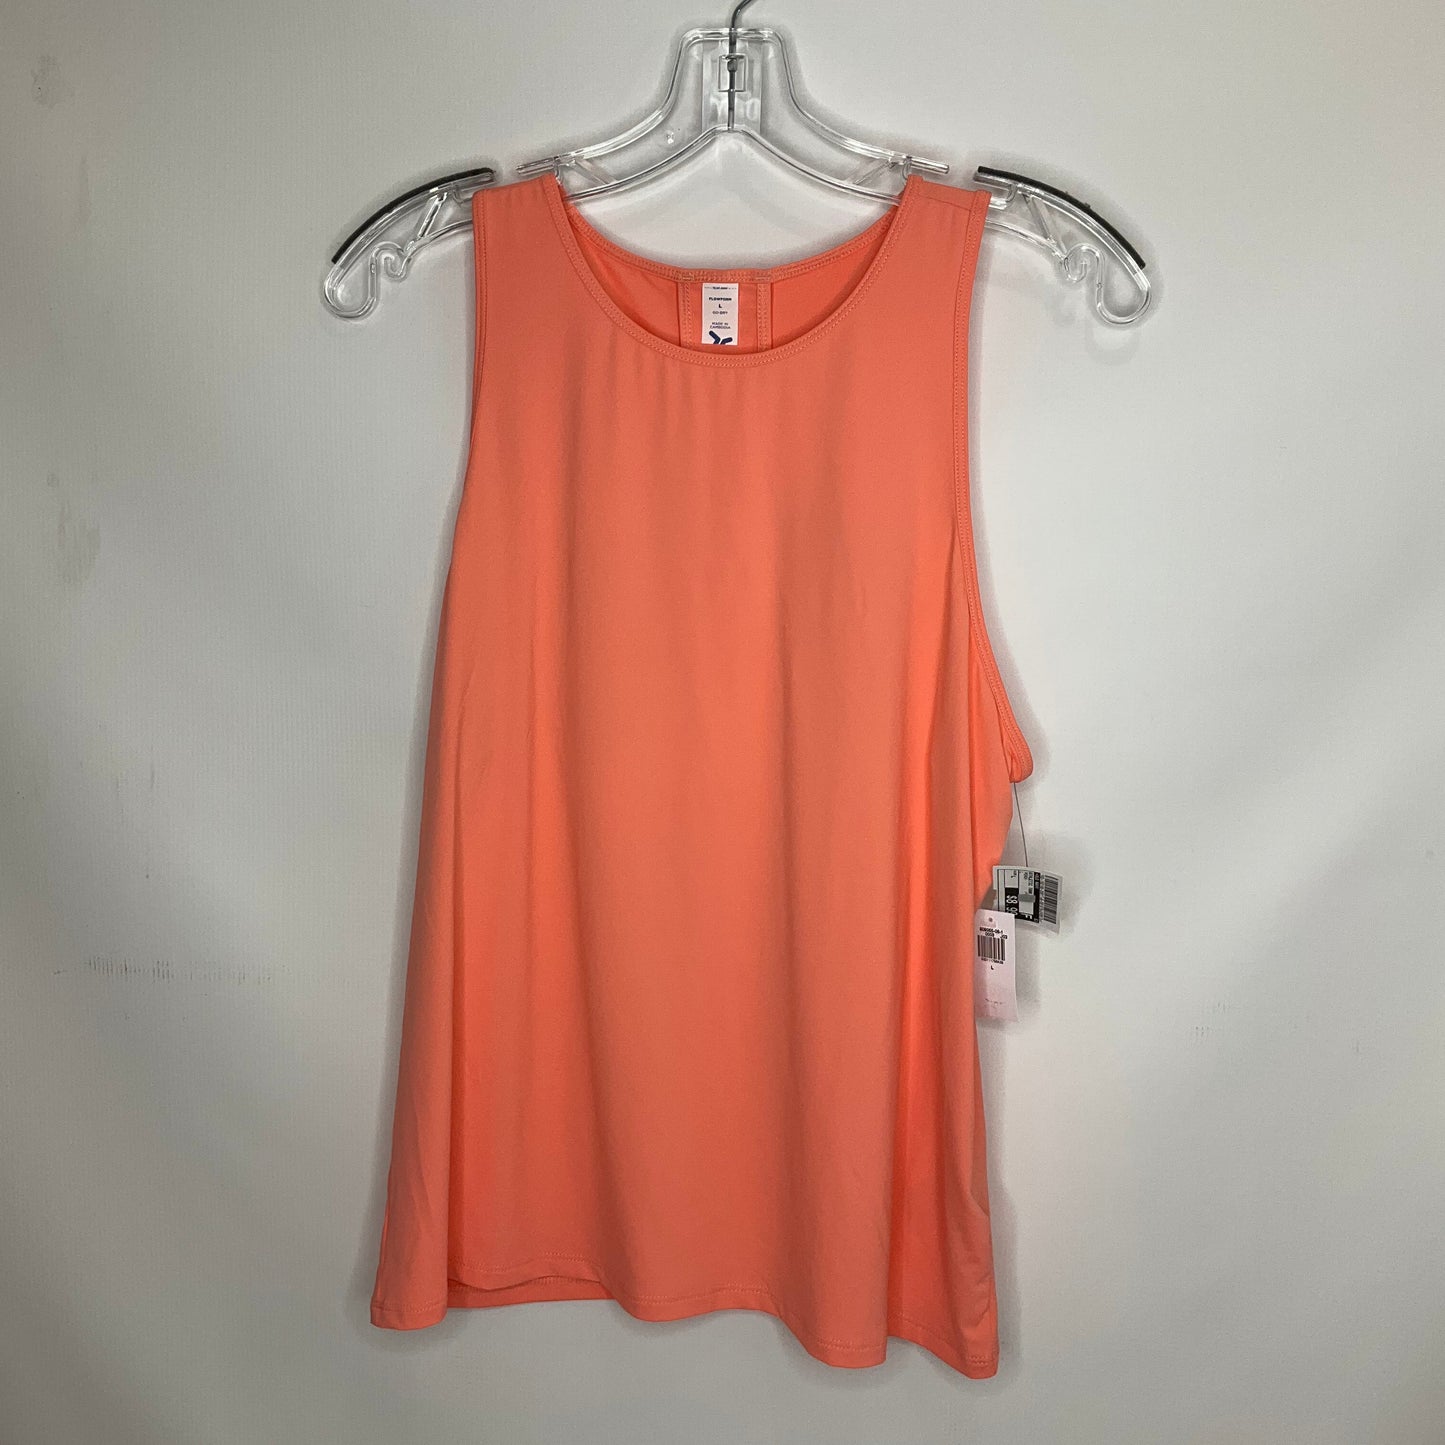 Peach Athletic Tank Top Old Navy, Size L